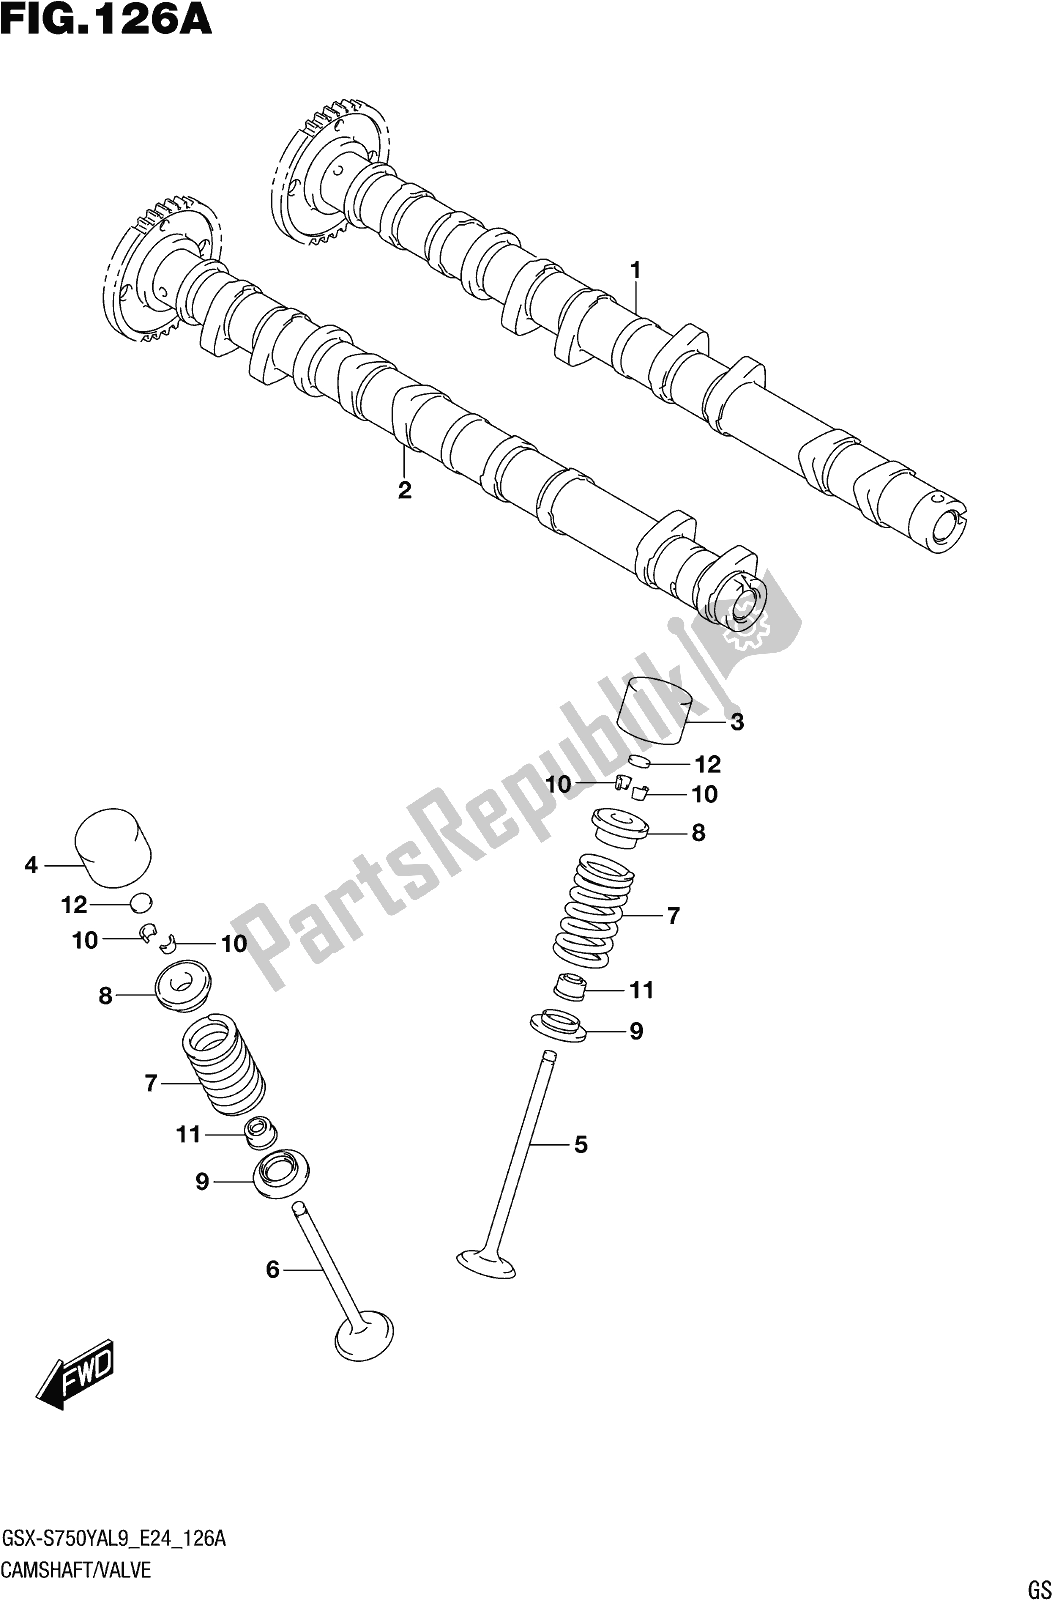 All parts for the Fig. 126a Camshaft/valve of the Suzuki Gsx-s 750 YA 2019